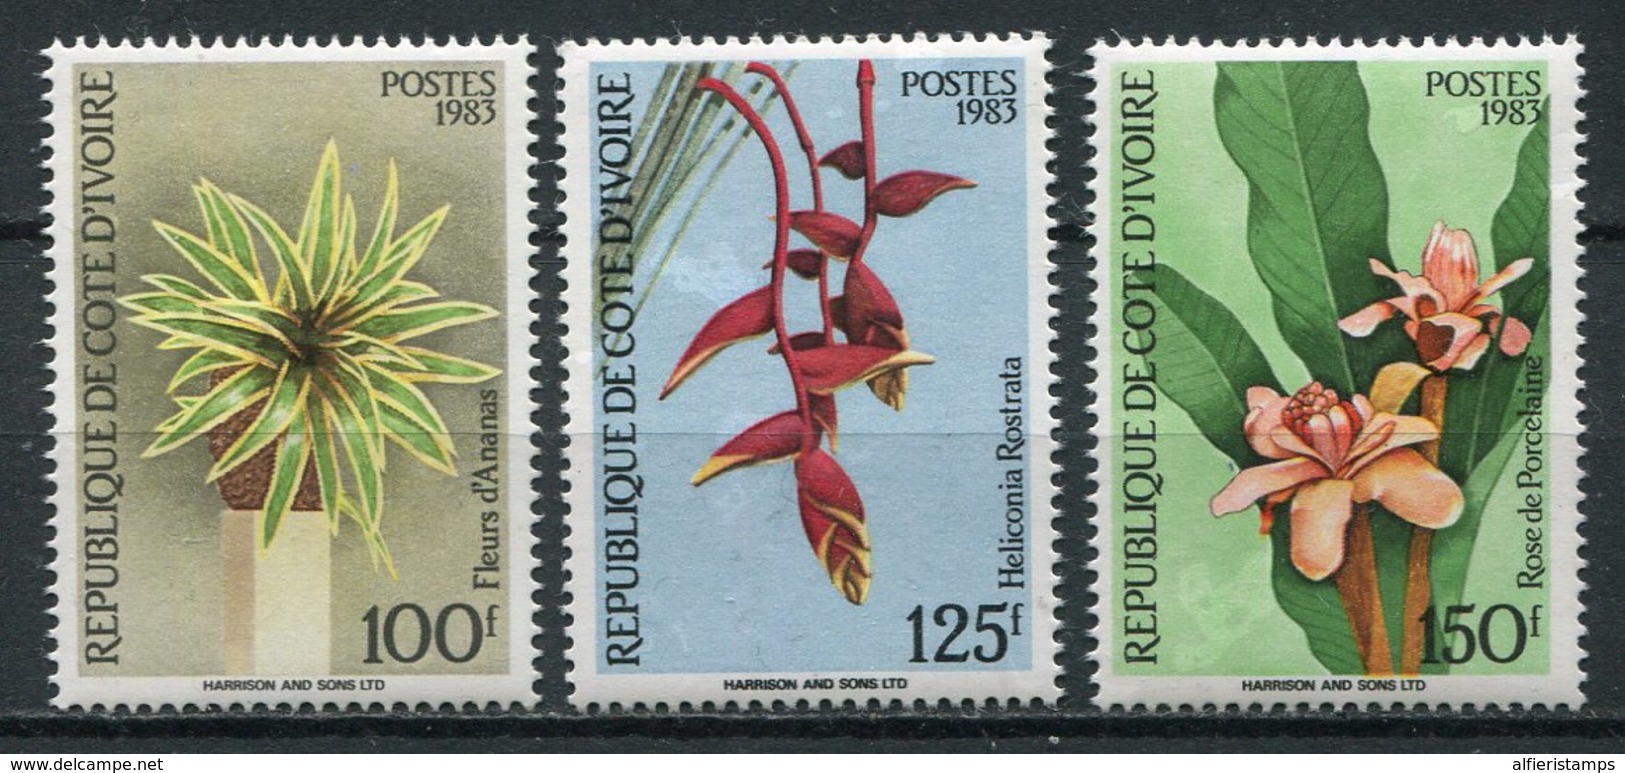 1983 -COTE D'IVOIRE- RARE FLOWERS- 3 VAL. - M.N.H. -LUXE !! - Costa D'Avorio (1960-...)